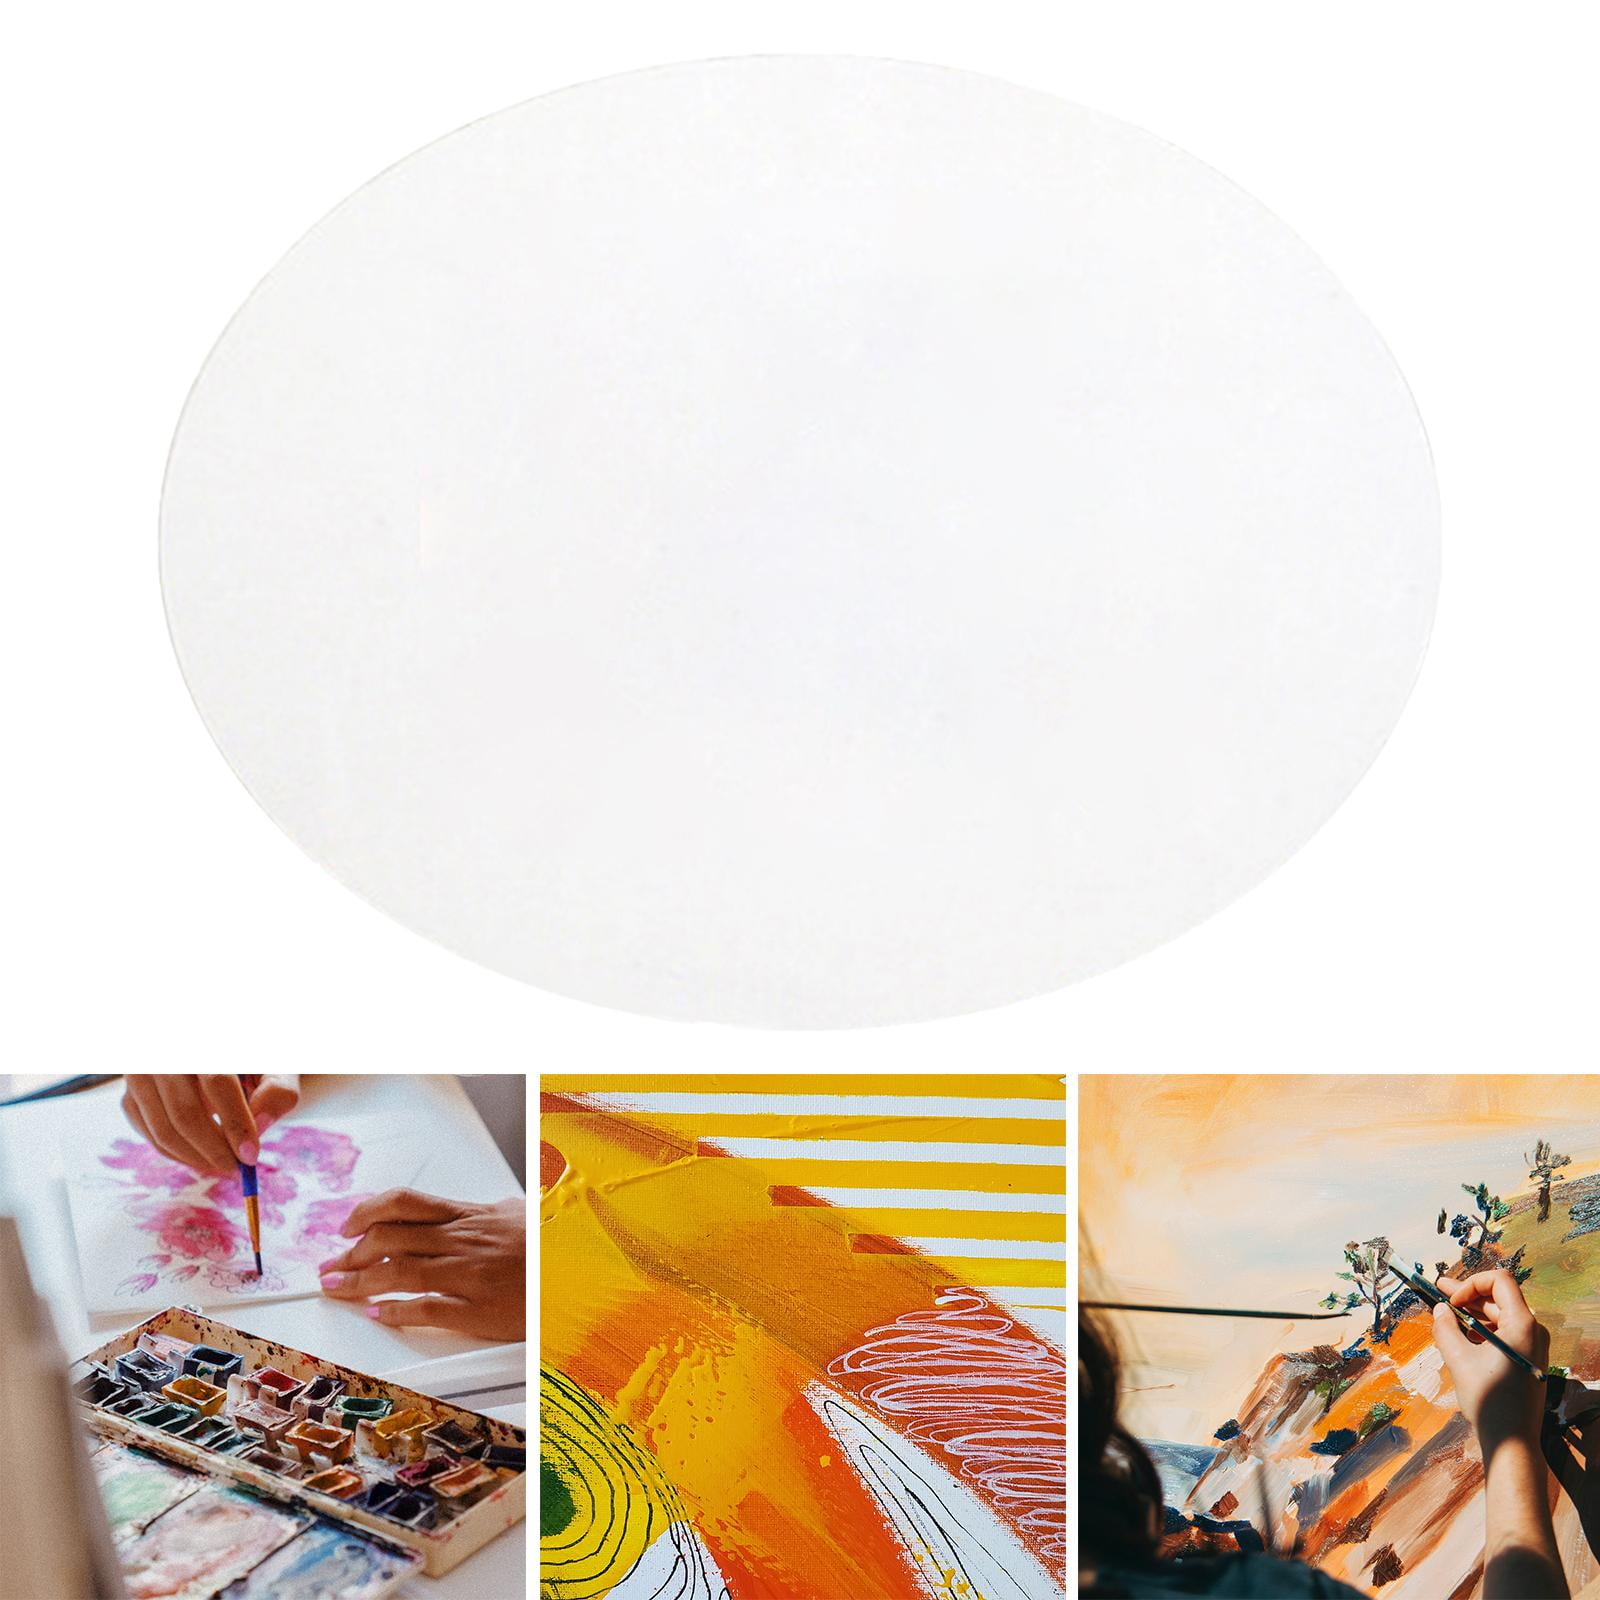 8 Pack Round Canvases for Painting, Pre Stretched Cotton Canvas Boards, Circle Shaped Art Canvas Panels for Acrylic Painting, Pouring, Oil Paint - Inc